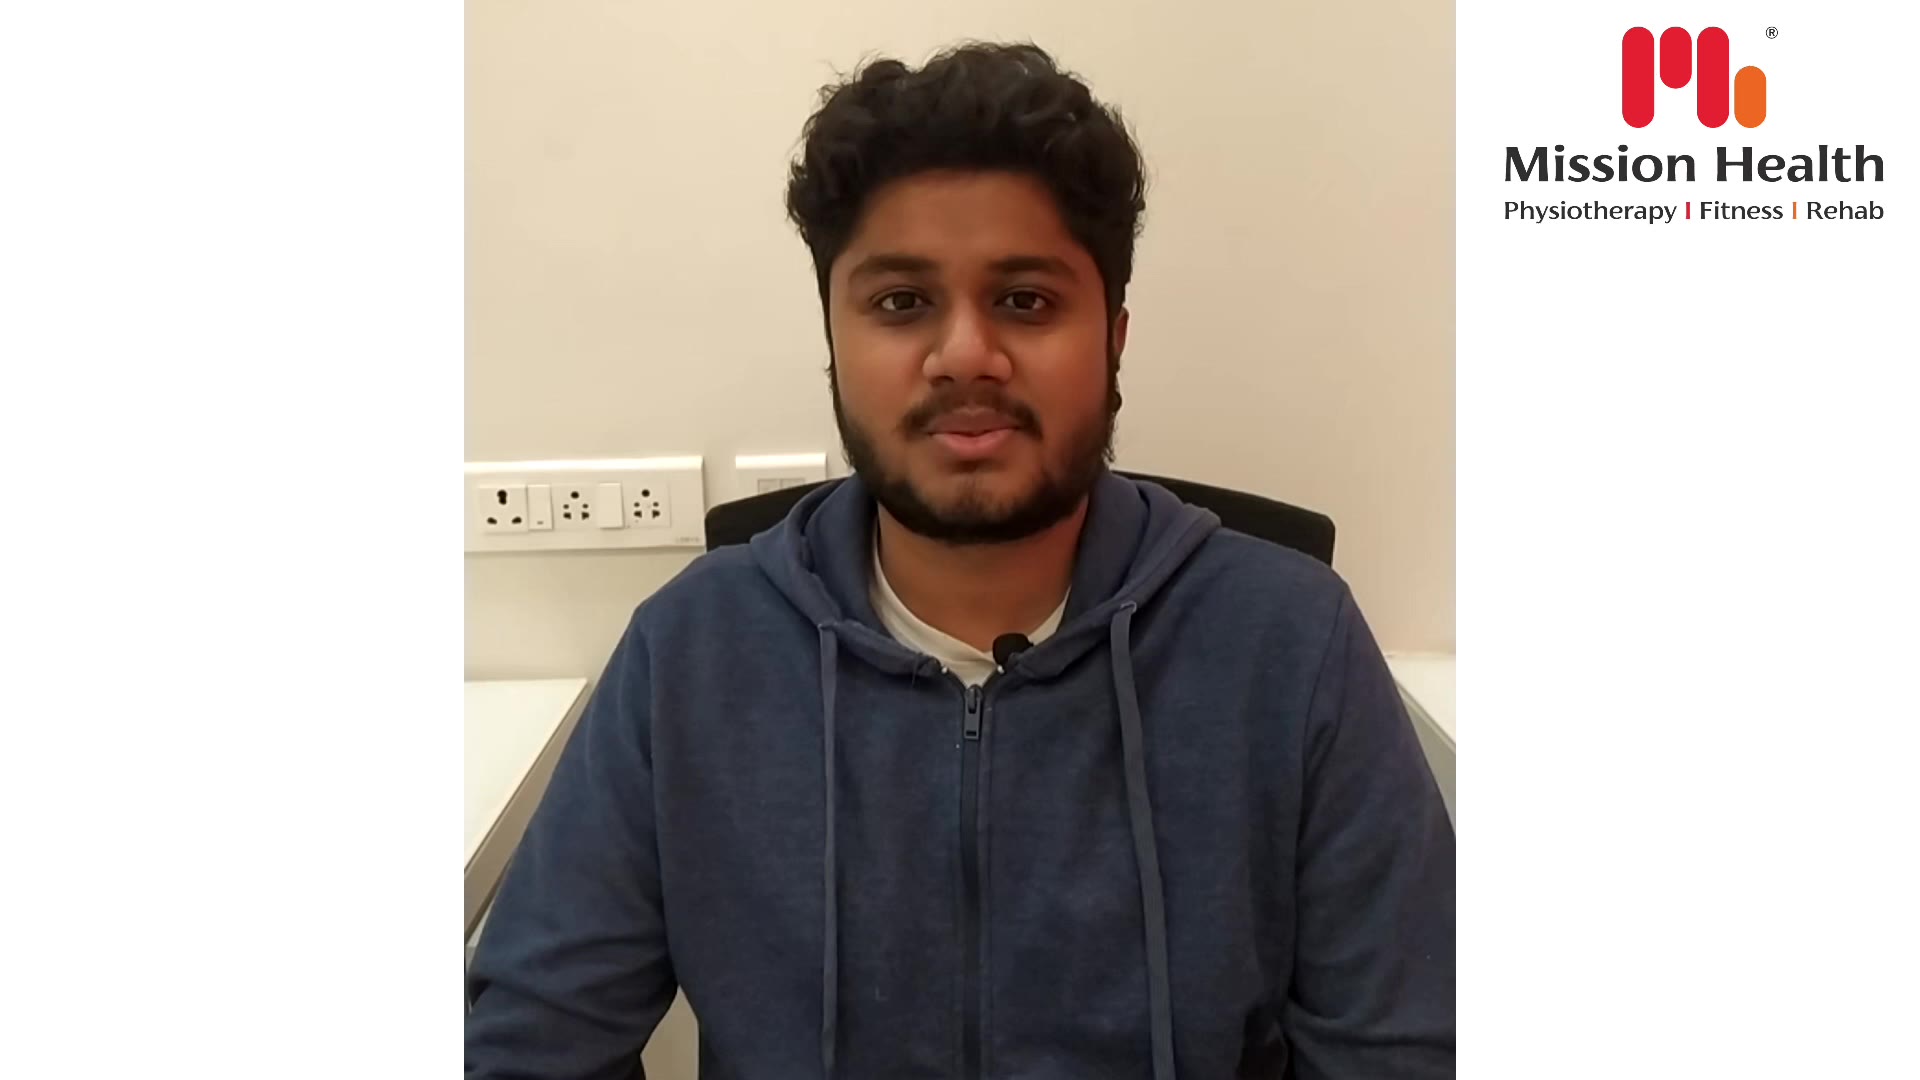 19 Year Old Malhar Shinde underwent ACL reconstruction surgery in 2019. 
After multiple attempts at rehab post surgery in UAE , Malhar finally managed to get the desired results at Mission Health in just 20 sessions.
Here he shares his journey of recovery with Mission Health in his words...

Call : +91 63562 63562
Visit : www.missionhealth.co.in
#testimonial 
#missionhealthfamily 
#MissionHealth 
#missionhealthindia 
#bestphysiotherapyclinicinahmedabad 
#happypatients 
#happyus 
#missionhealthfeedback
#positivevibes 
#viralpost 
#viralvideos 
#trending 
#explorepage✨ 
#instafamily❤️ 
#indiasbestphysiotherapycentre 
#bestvideooftheday❤️ 
#aclinjury 
#aclrecovery